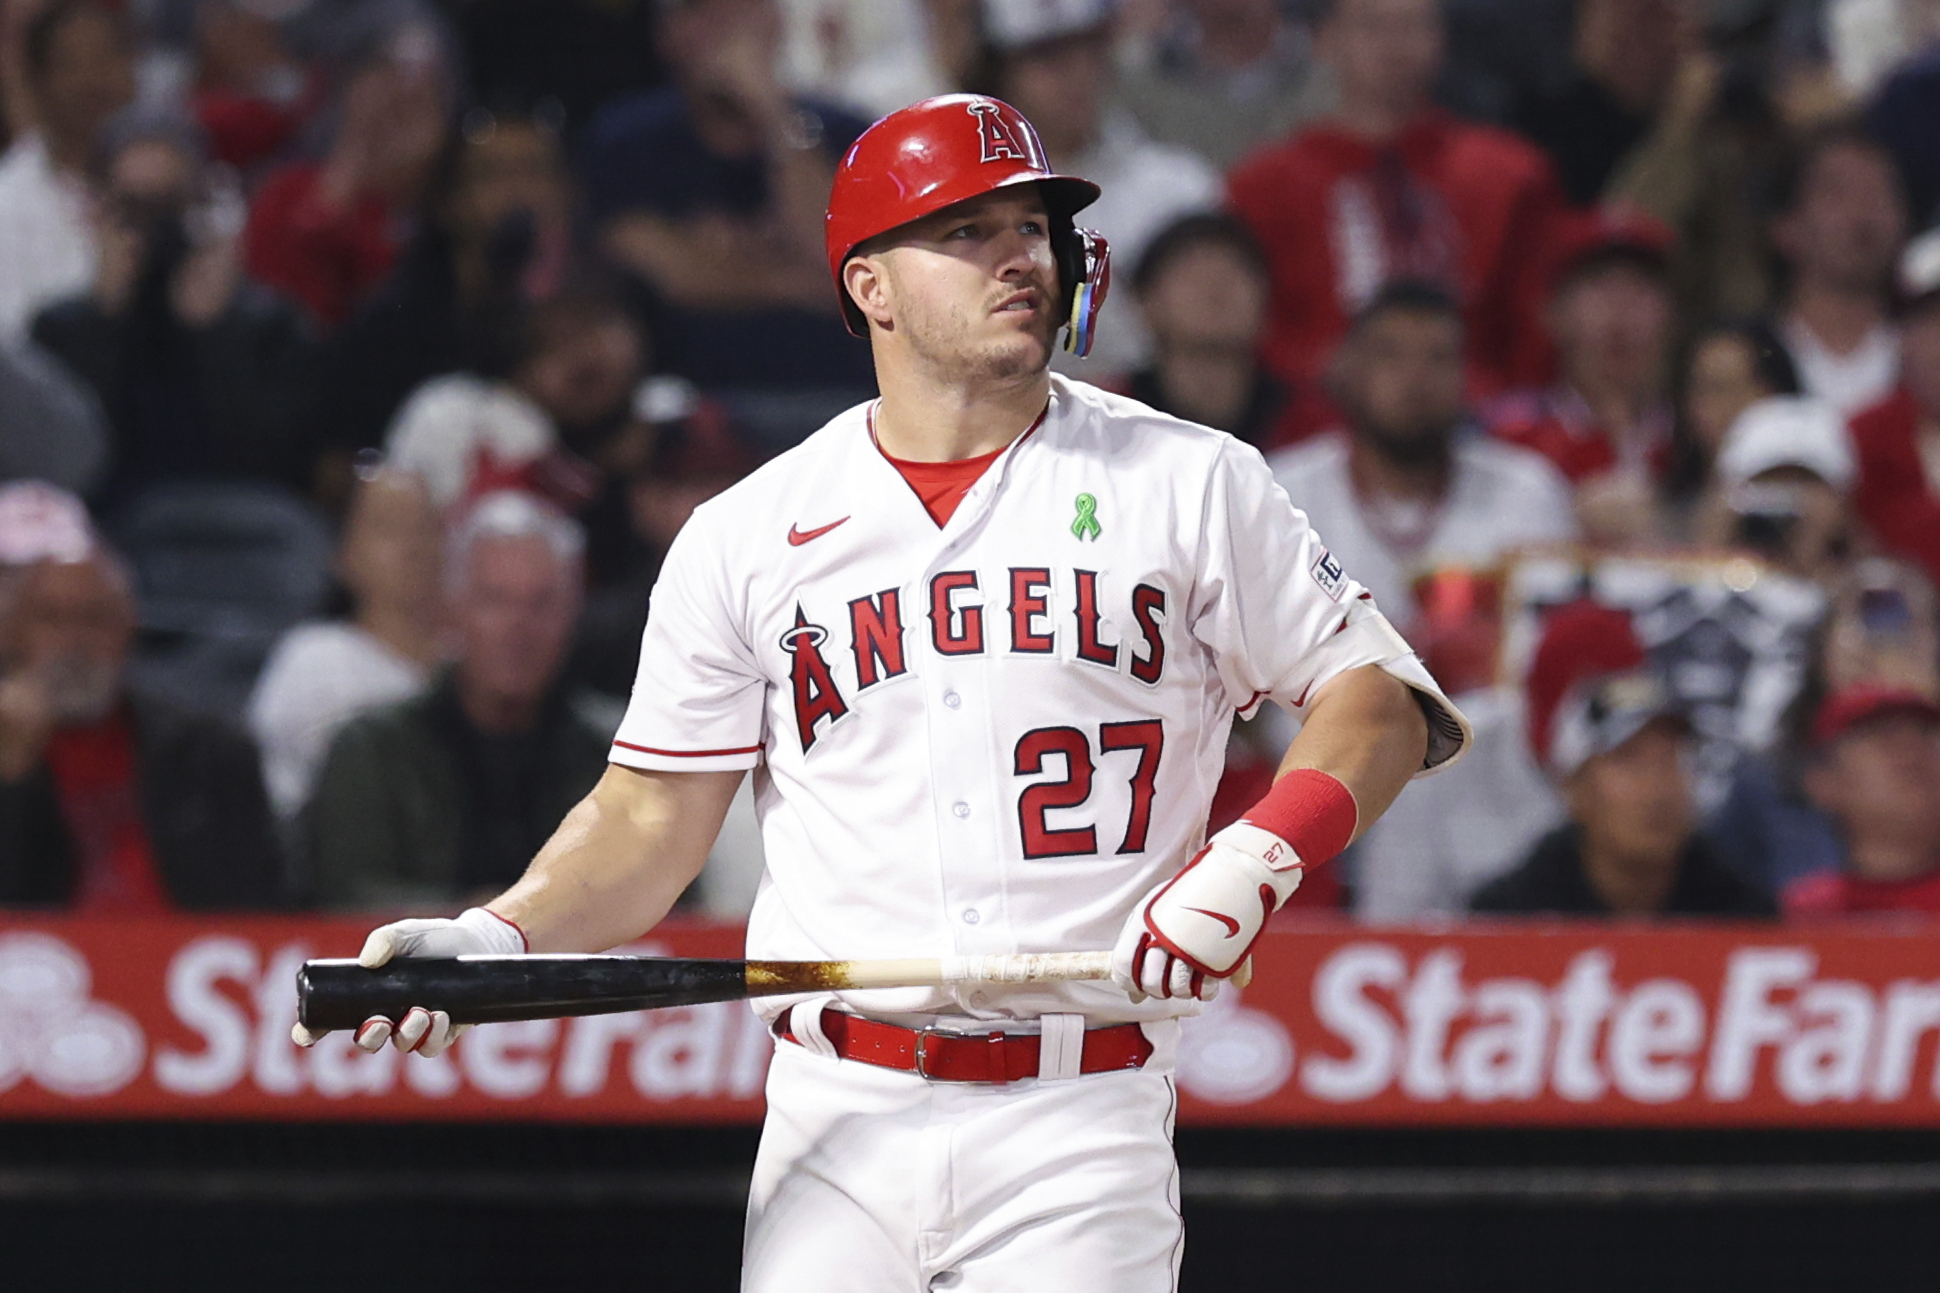 Angels' Mike Trout aiming to return before end of season - Los Angeles Times